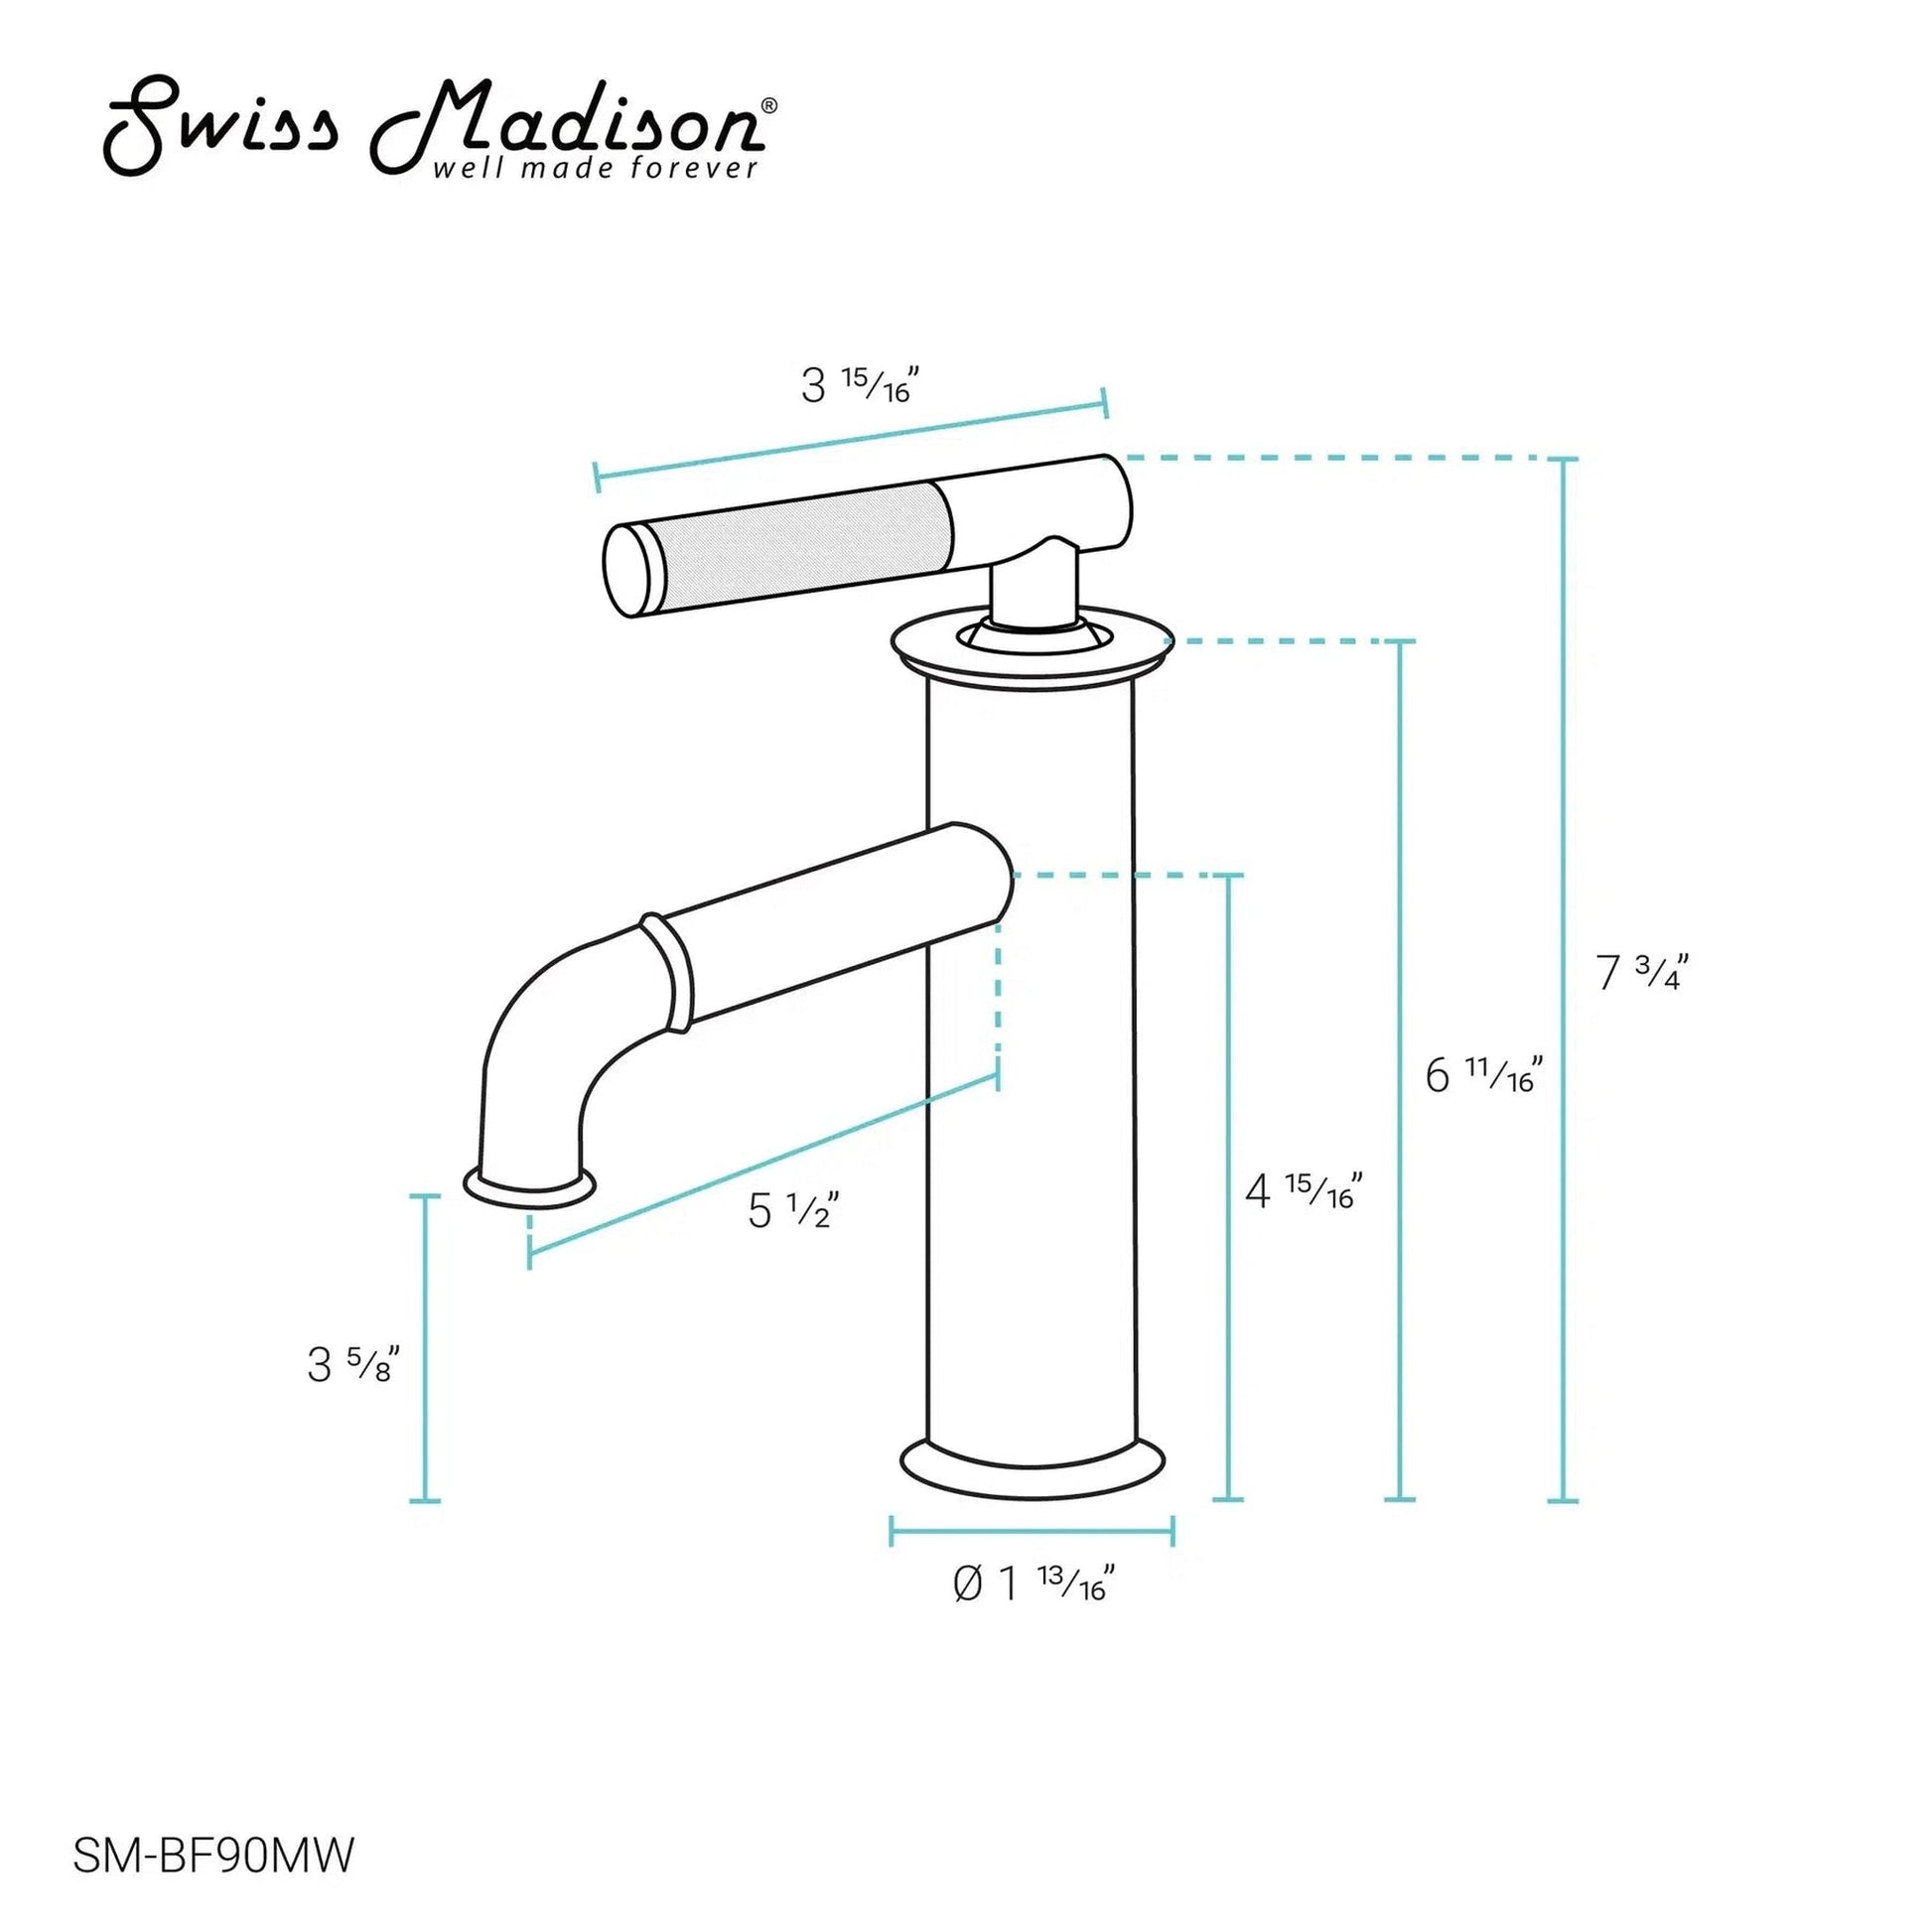 Swiss Madison Avallon 8" Single-Handle Matte White Bathroom Faucet With 1.2 GPM Flow Rate